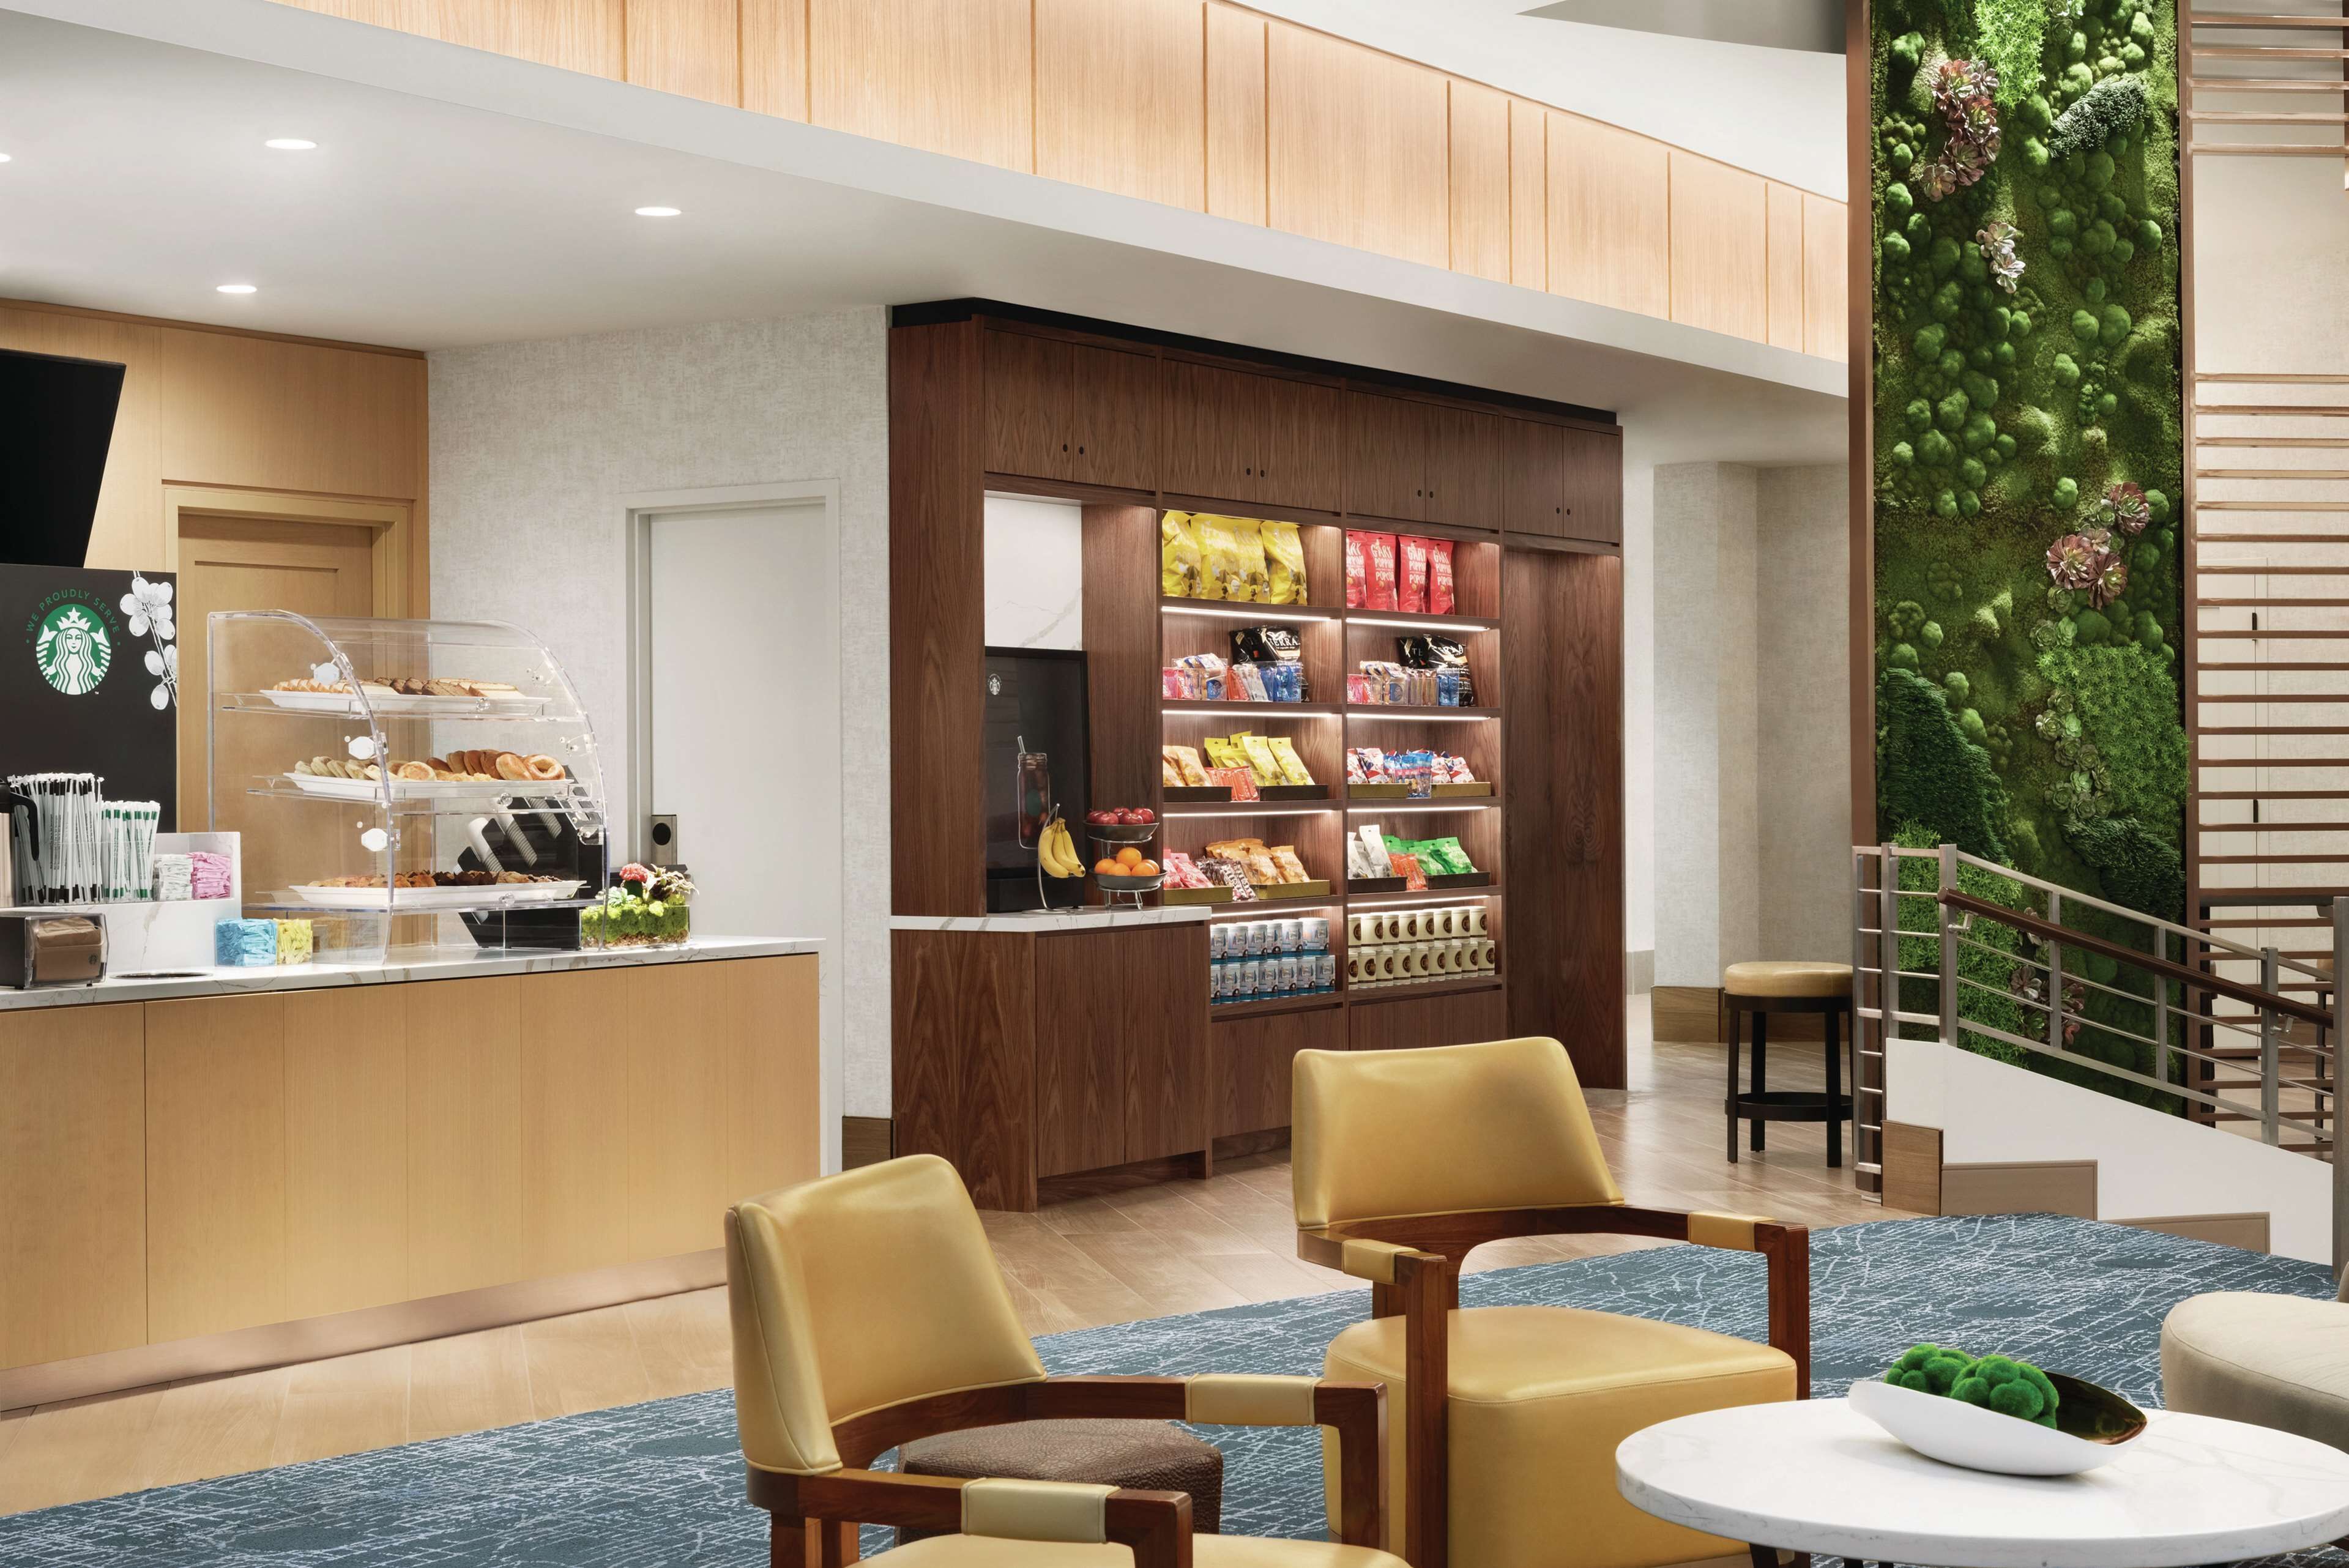 Hilton Grand Vacations Club Chicago Magnificent Mile